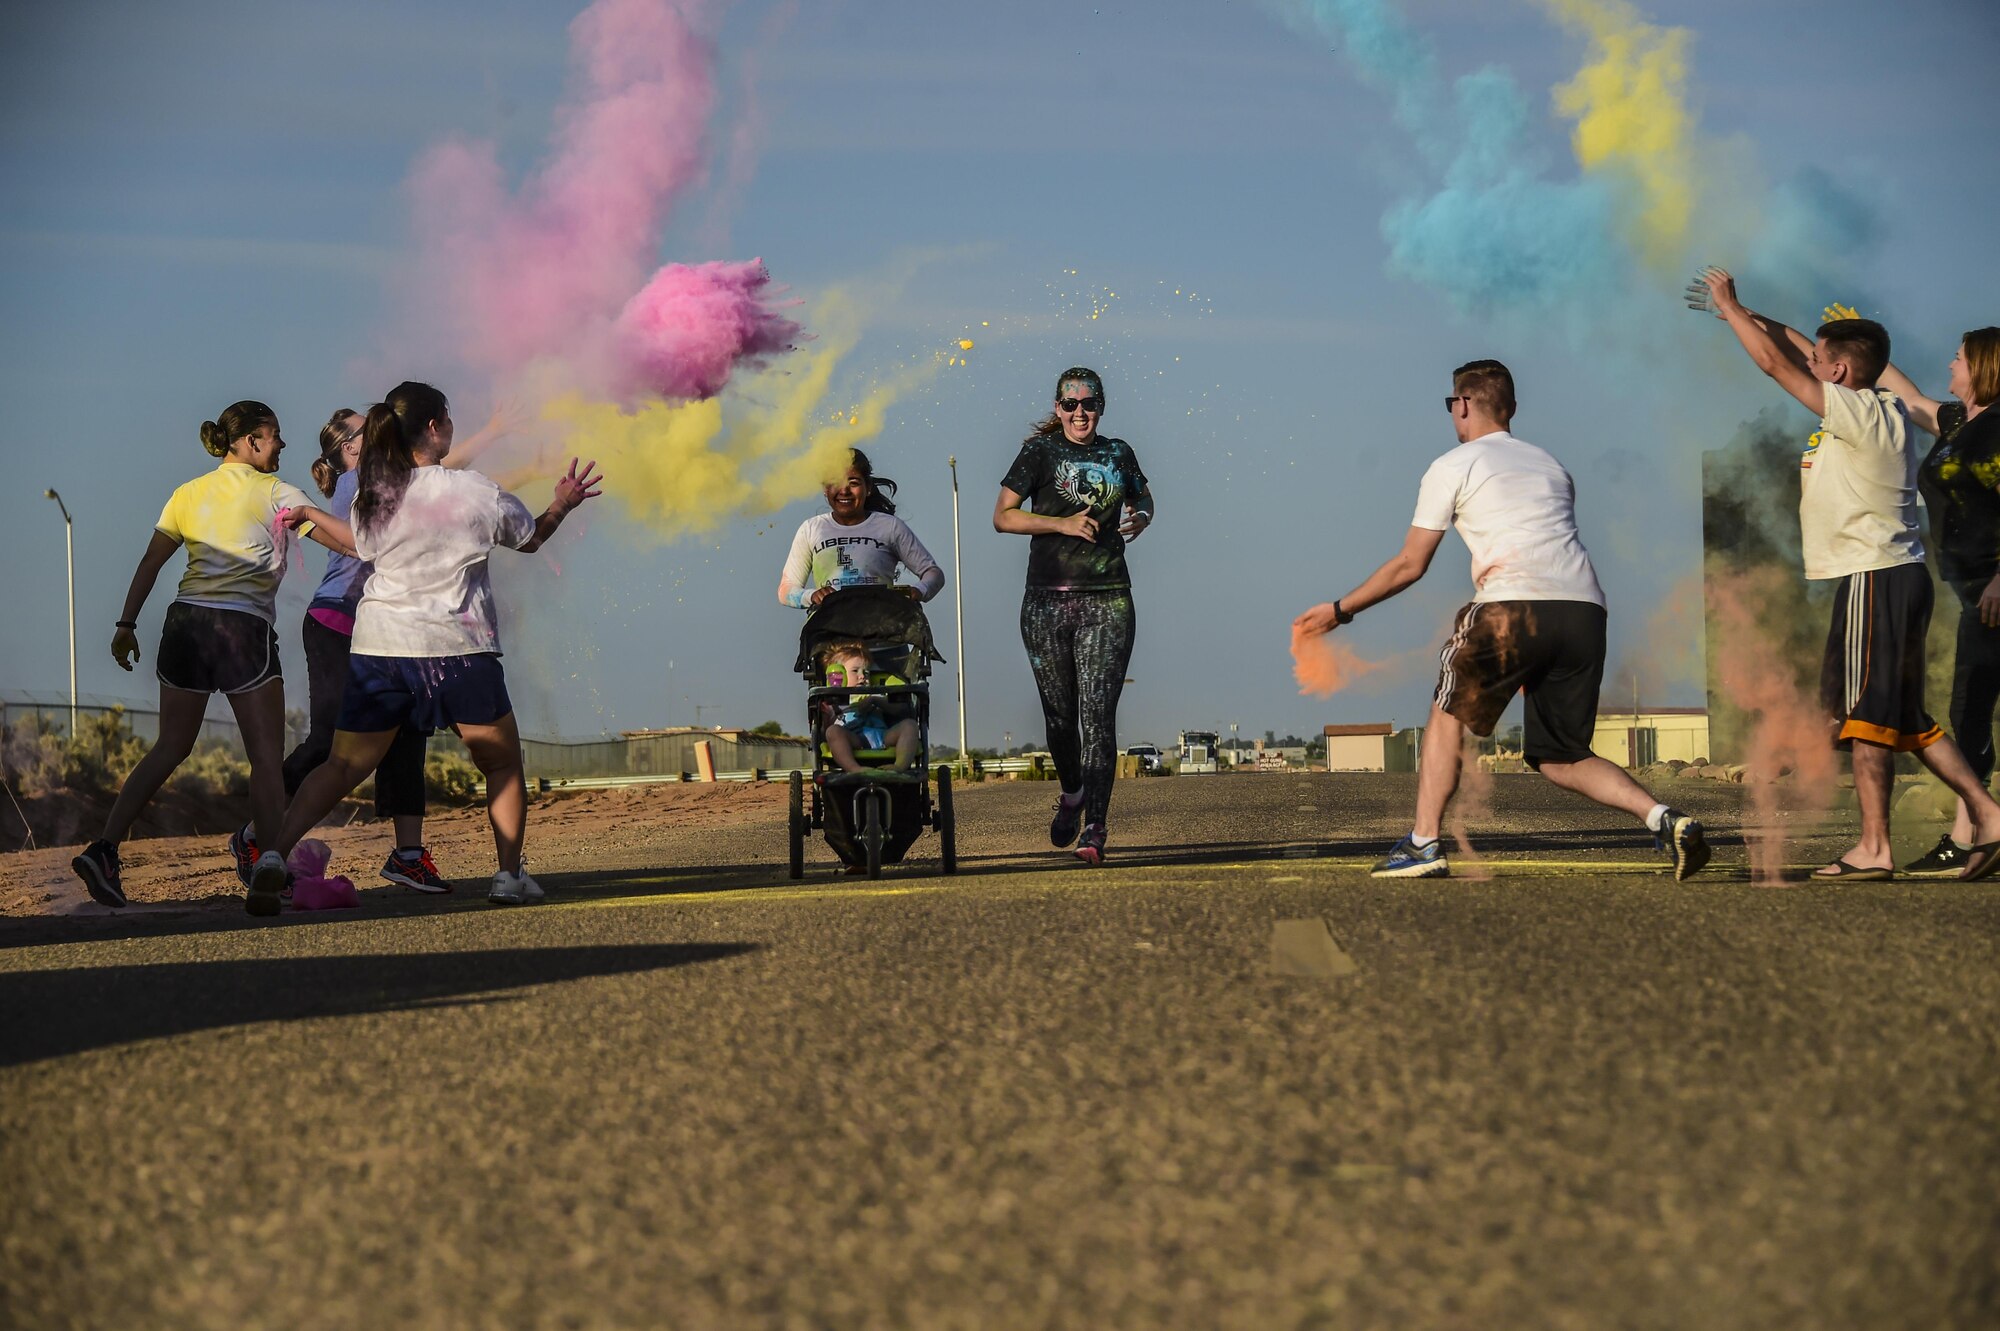 Runners participating in the LGBT Pride Month 5k color run pass through a colored powder throwing station June 1, 2017 at Luke Air Force Base, Ariz. The multicolored chalk was a representation of the LGBT community rainbow flag. (U.S. Air Force photo by Airman 1st Class Caleb Worpel)